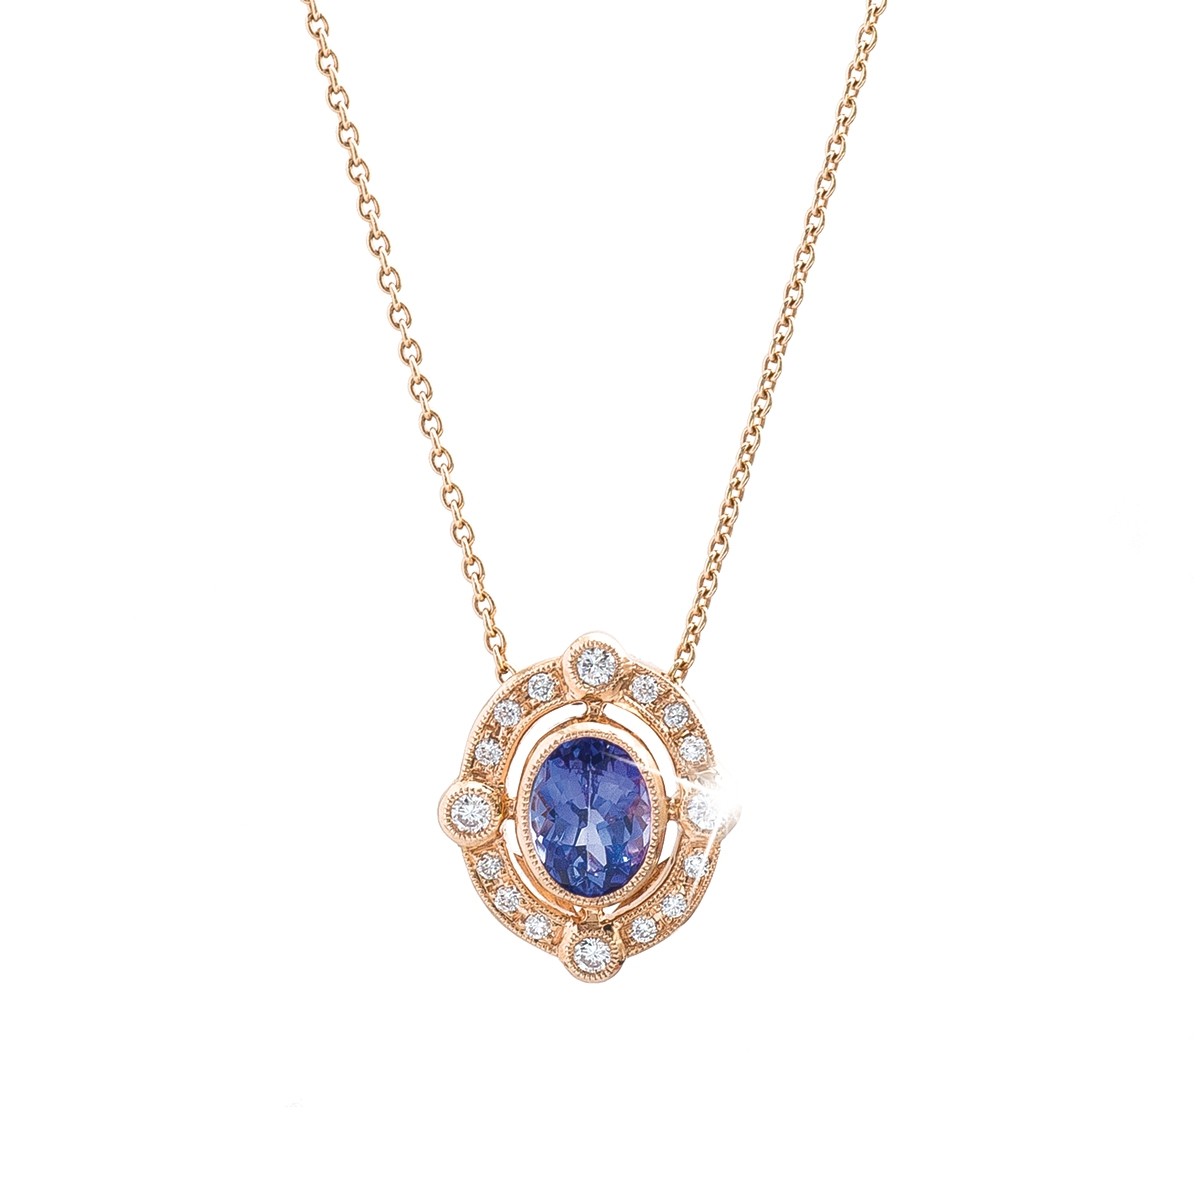 Vintage yellow gold Beverley K necklace set with a blue gemstone surrounded by diamonds and pearls.